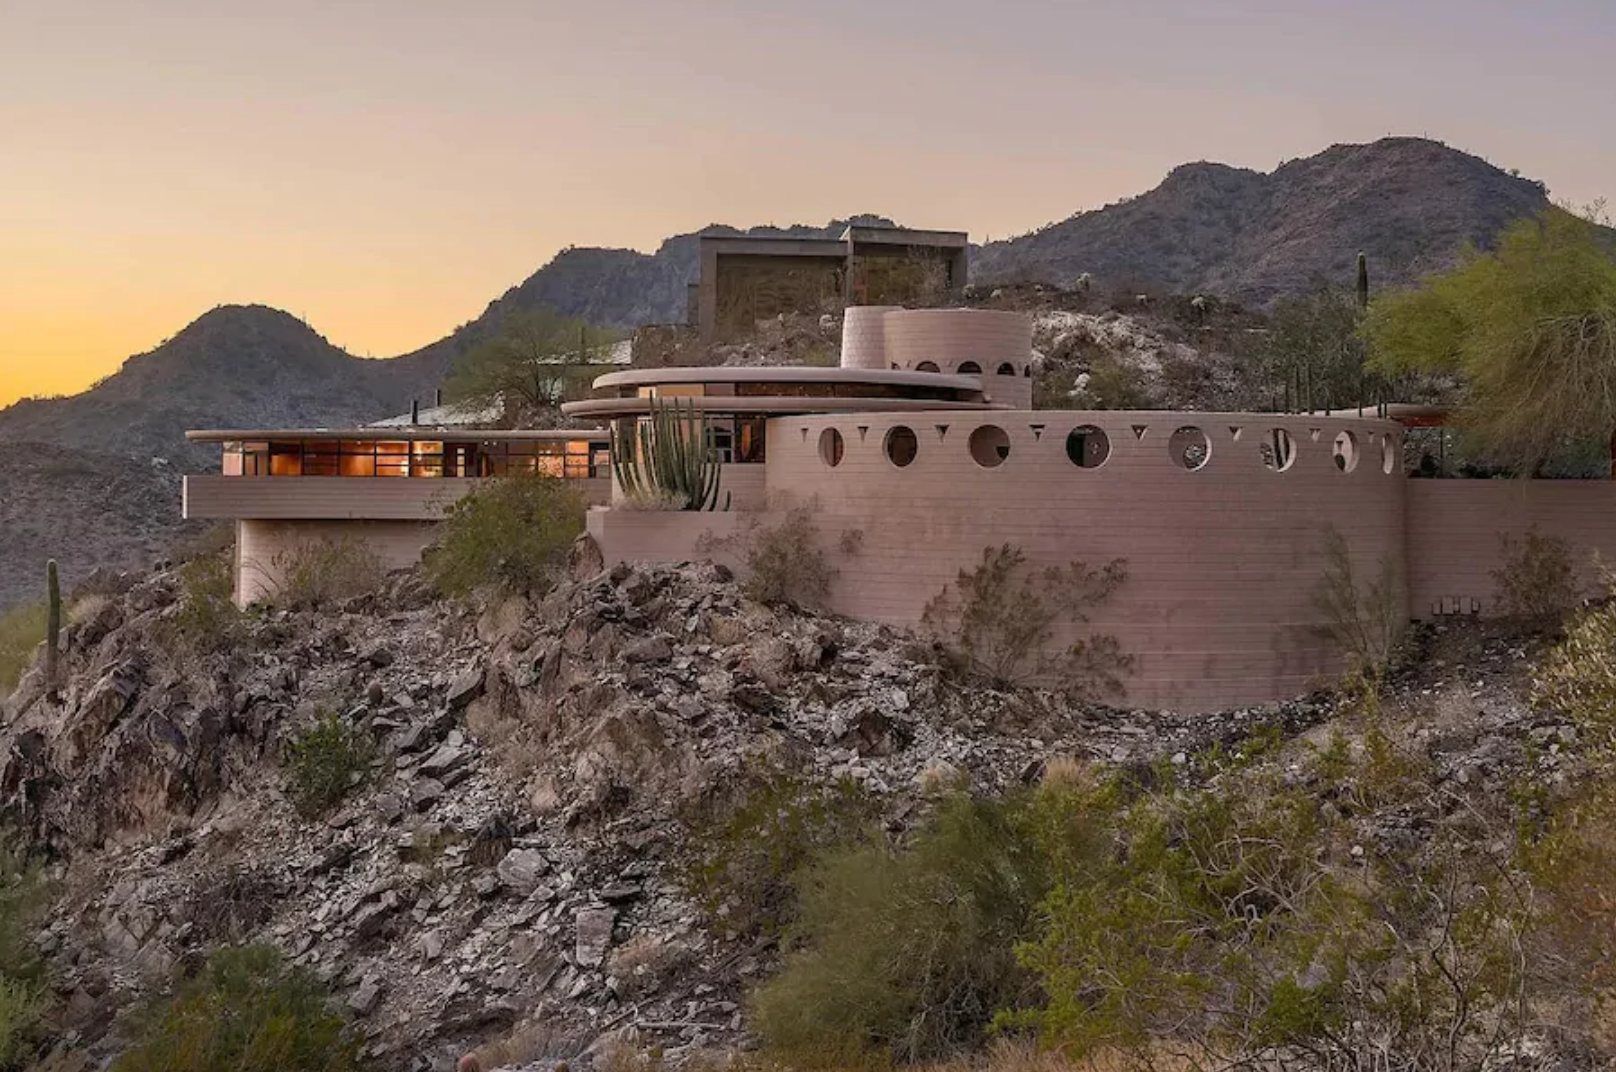 top vacation homes In Scottsdale and Phoenix, AZ